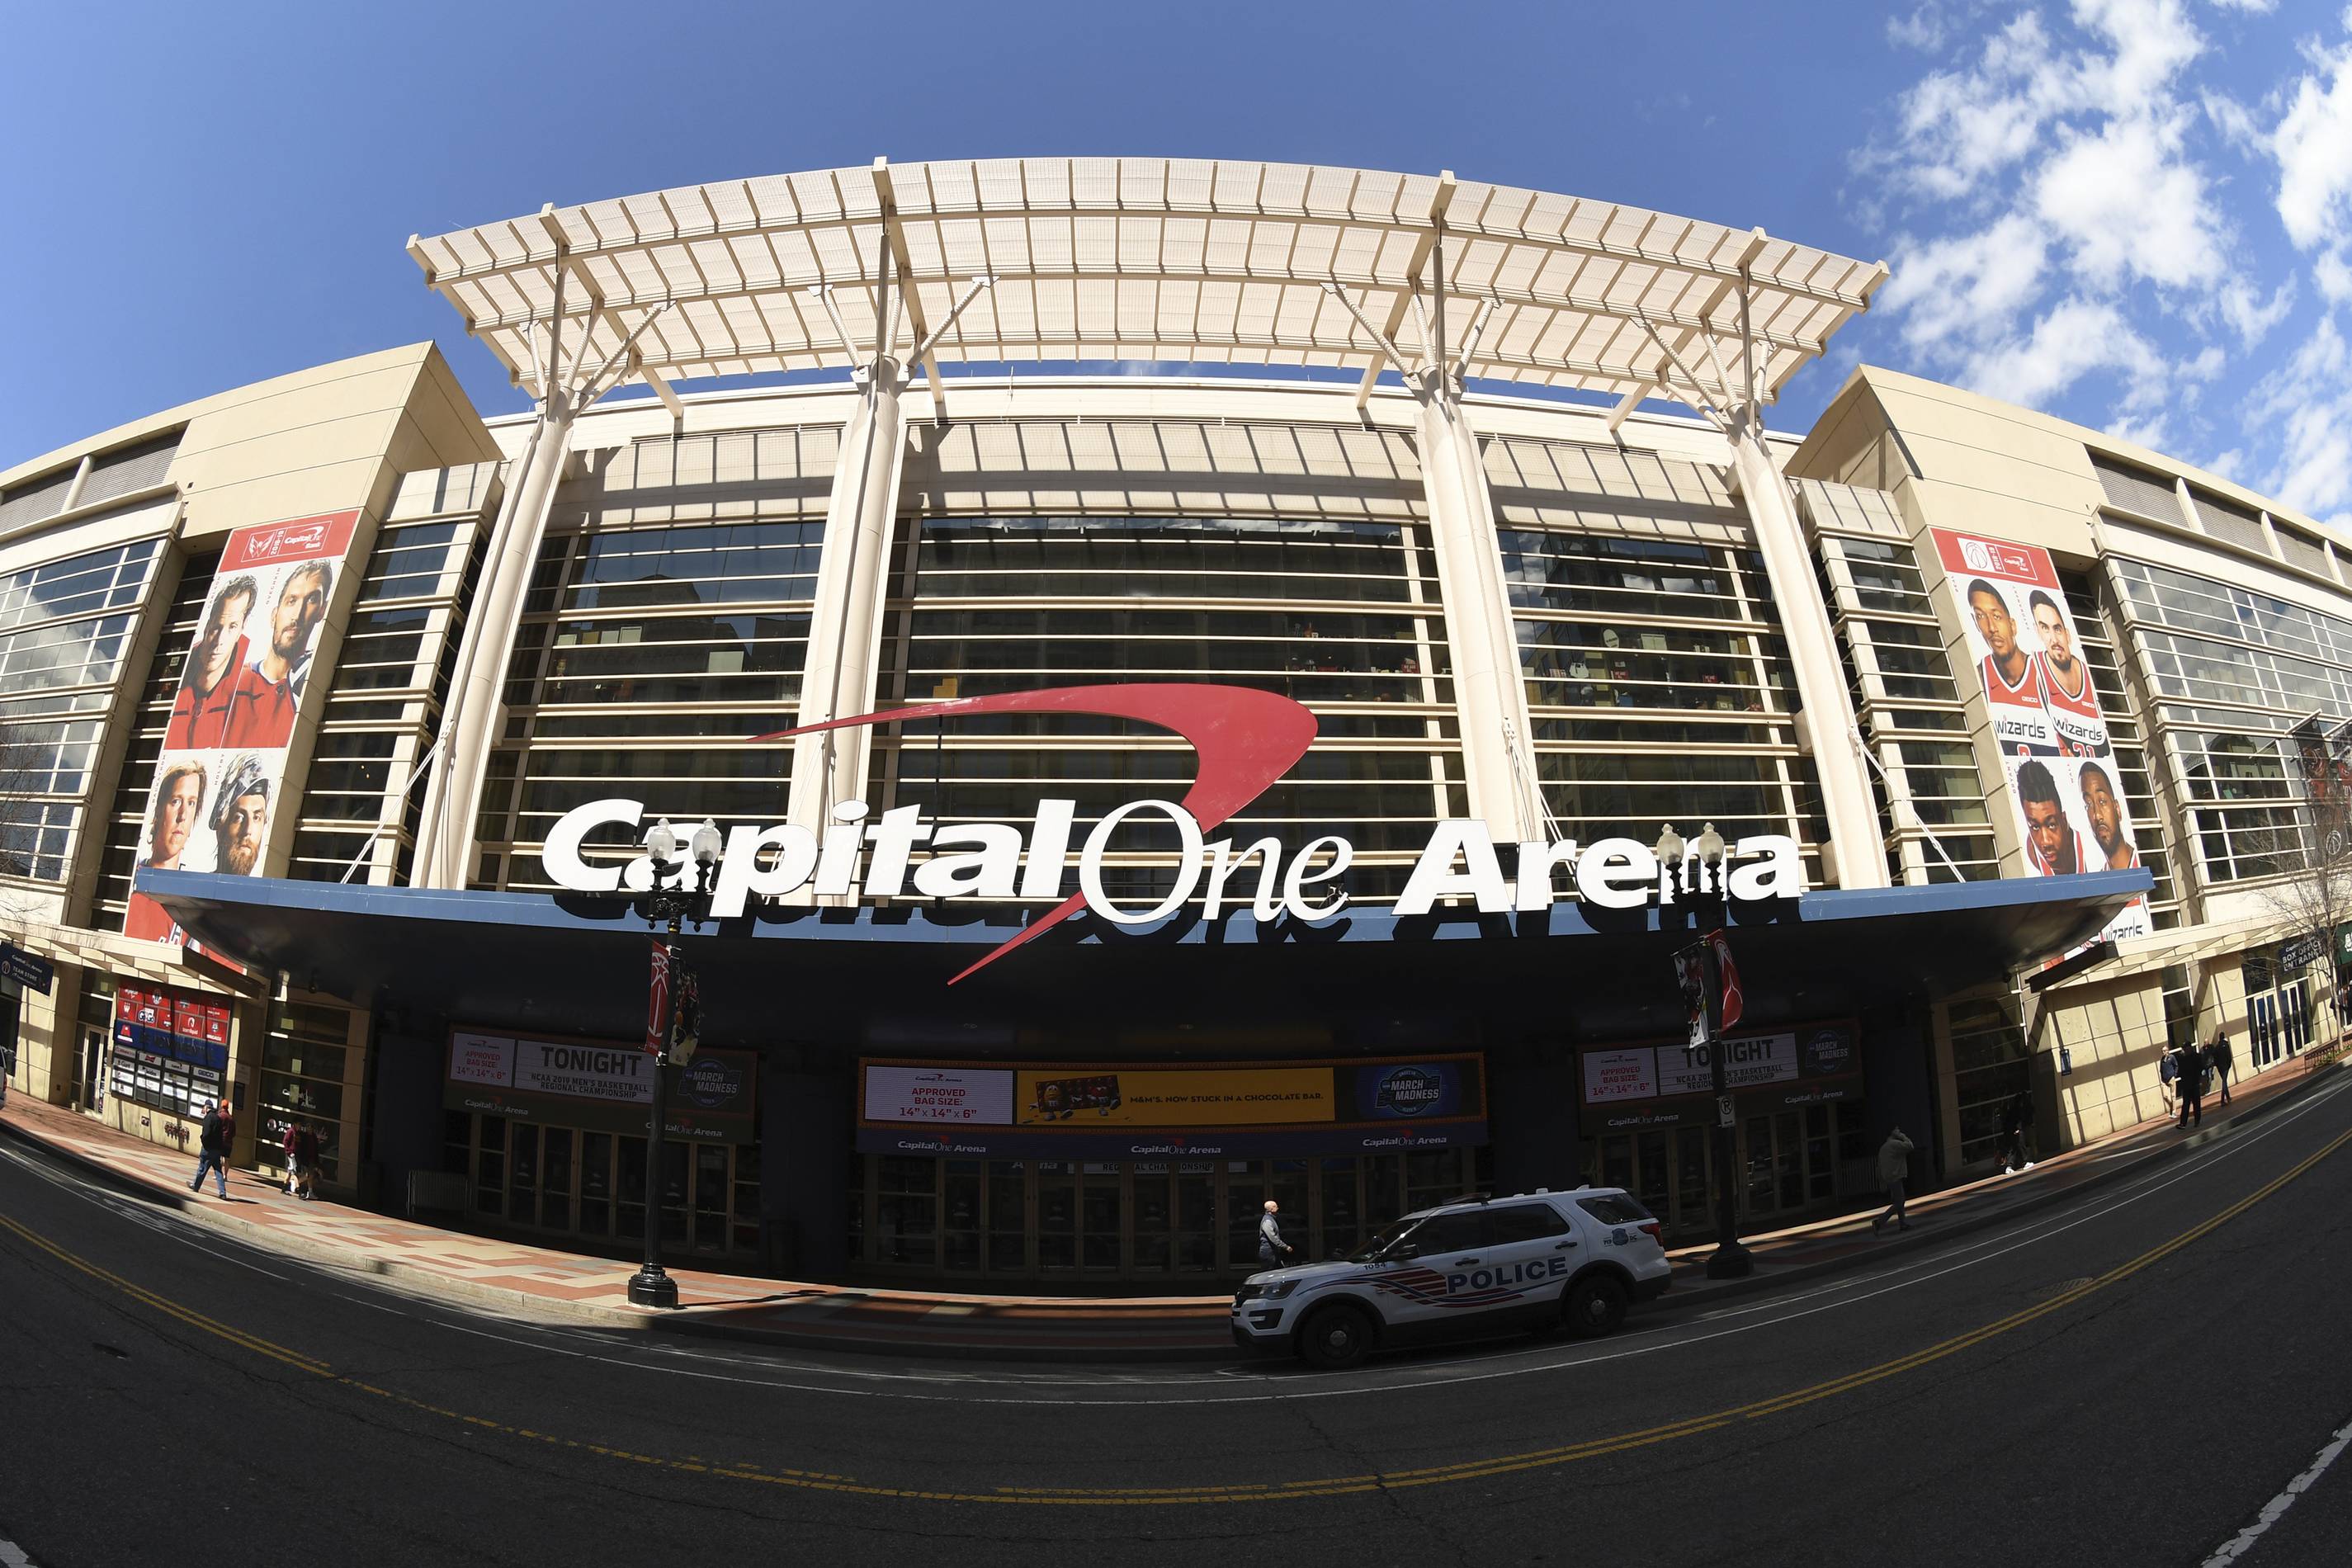 dc-capital-one-arena-credit-mitchell-layton-getty-images.jpg